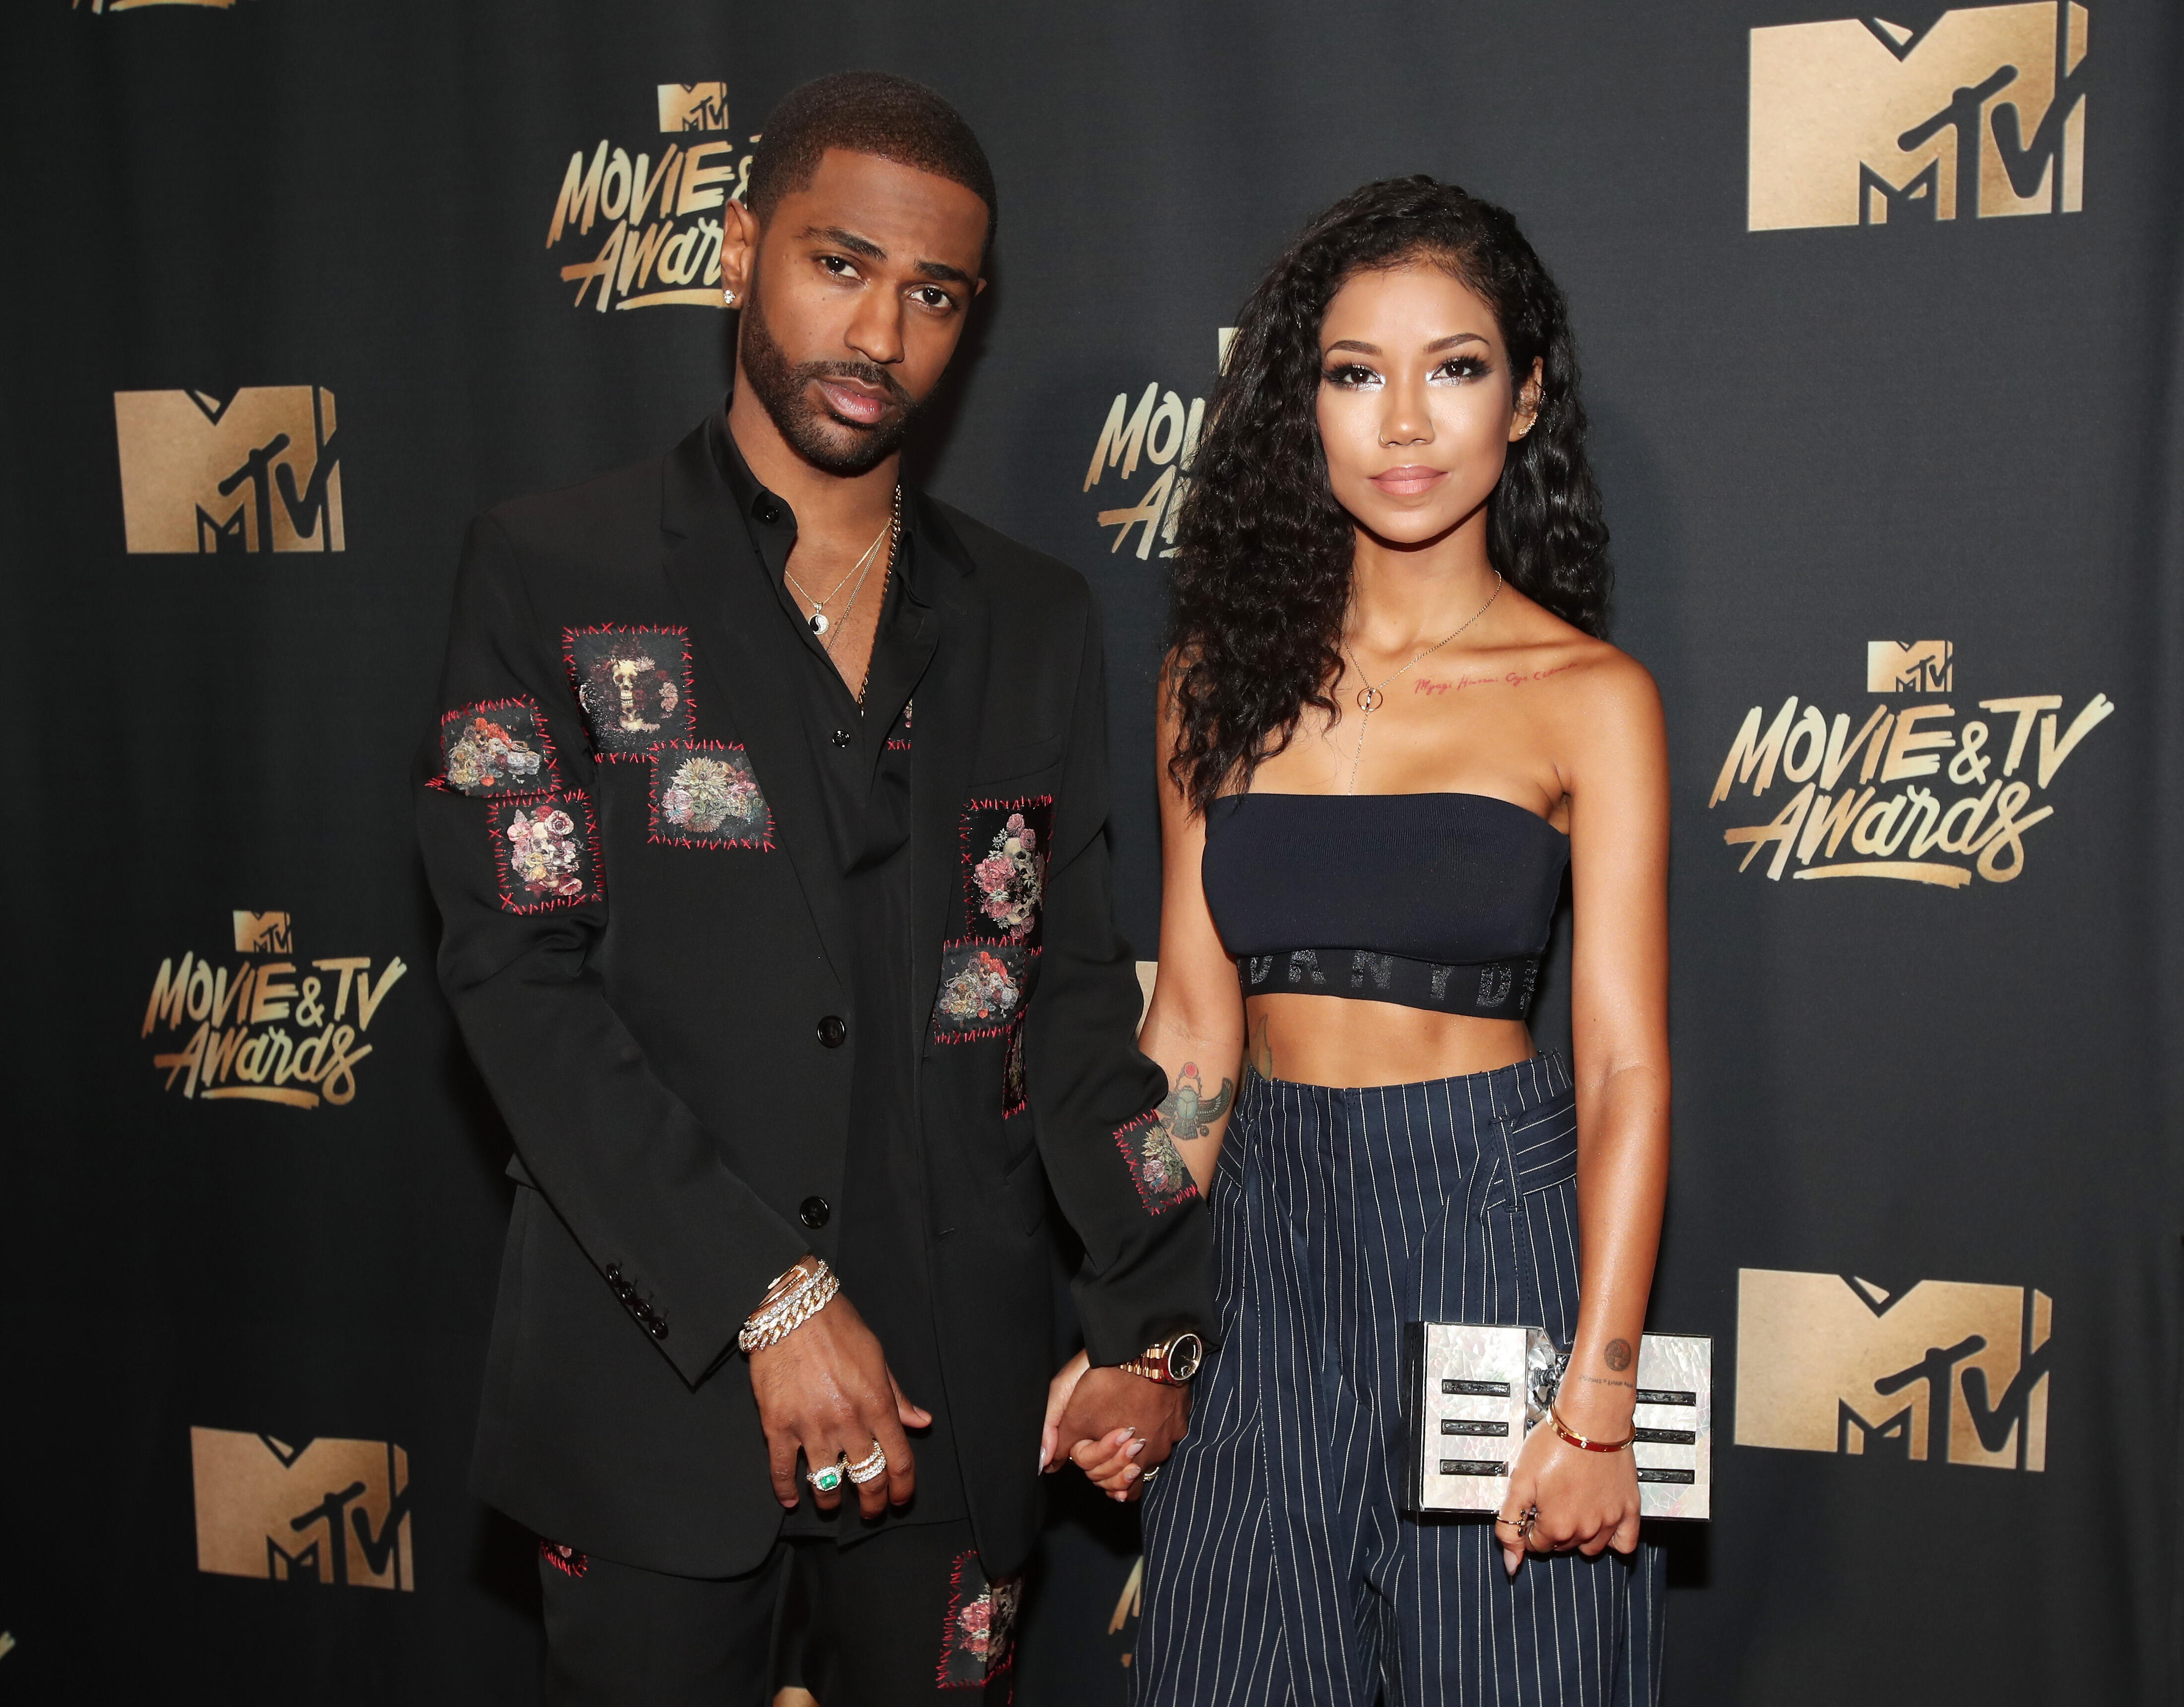 Is Jhene Aiko Singing About Big Sean In Her New Song? - Thumbnail Image